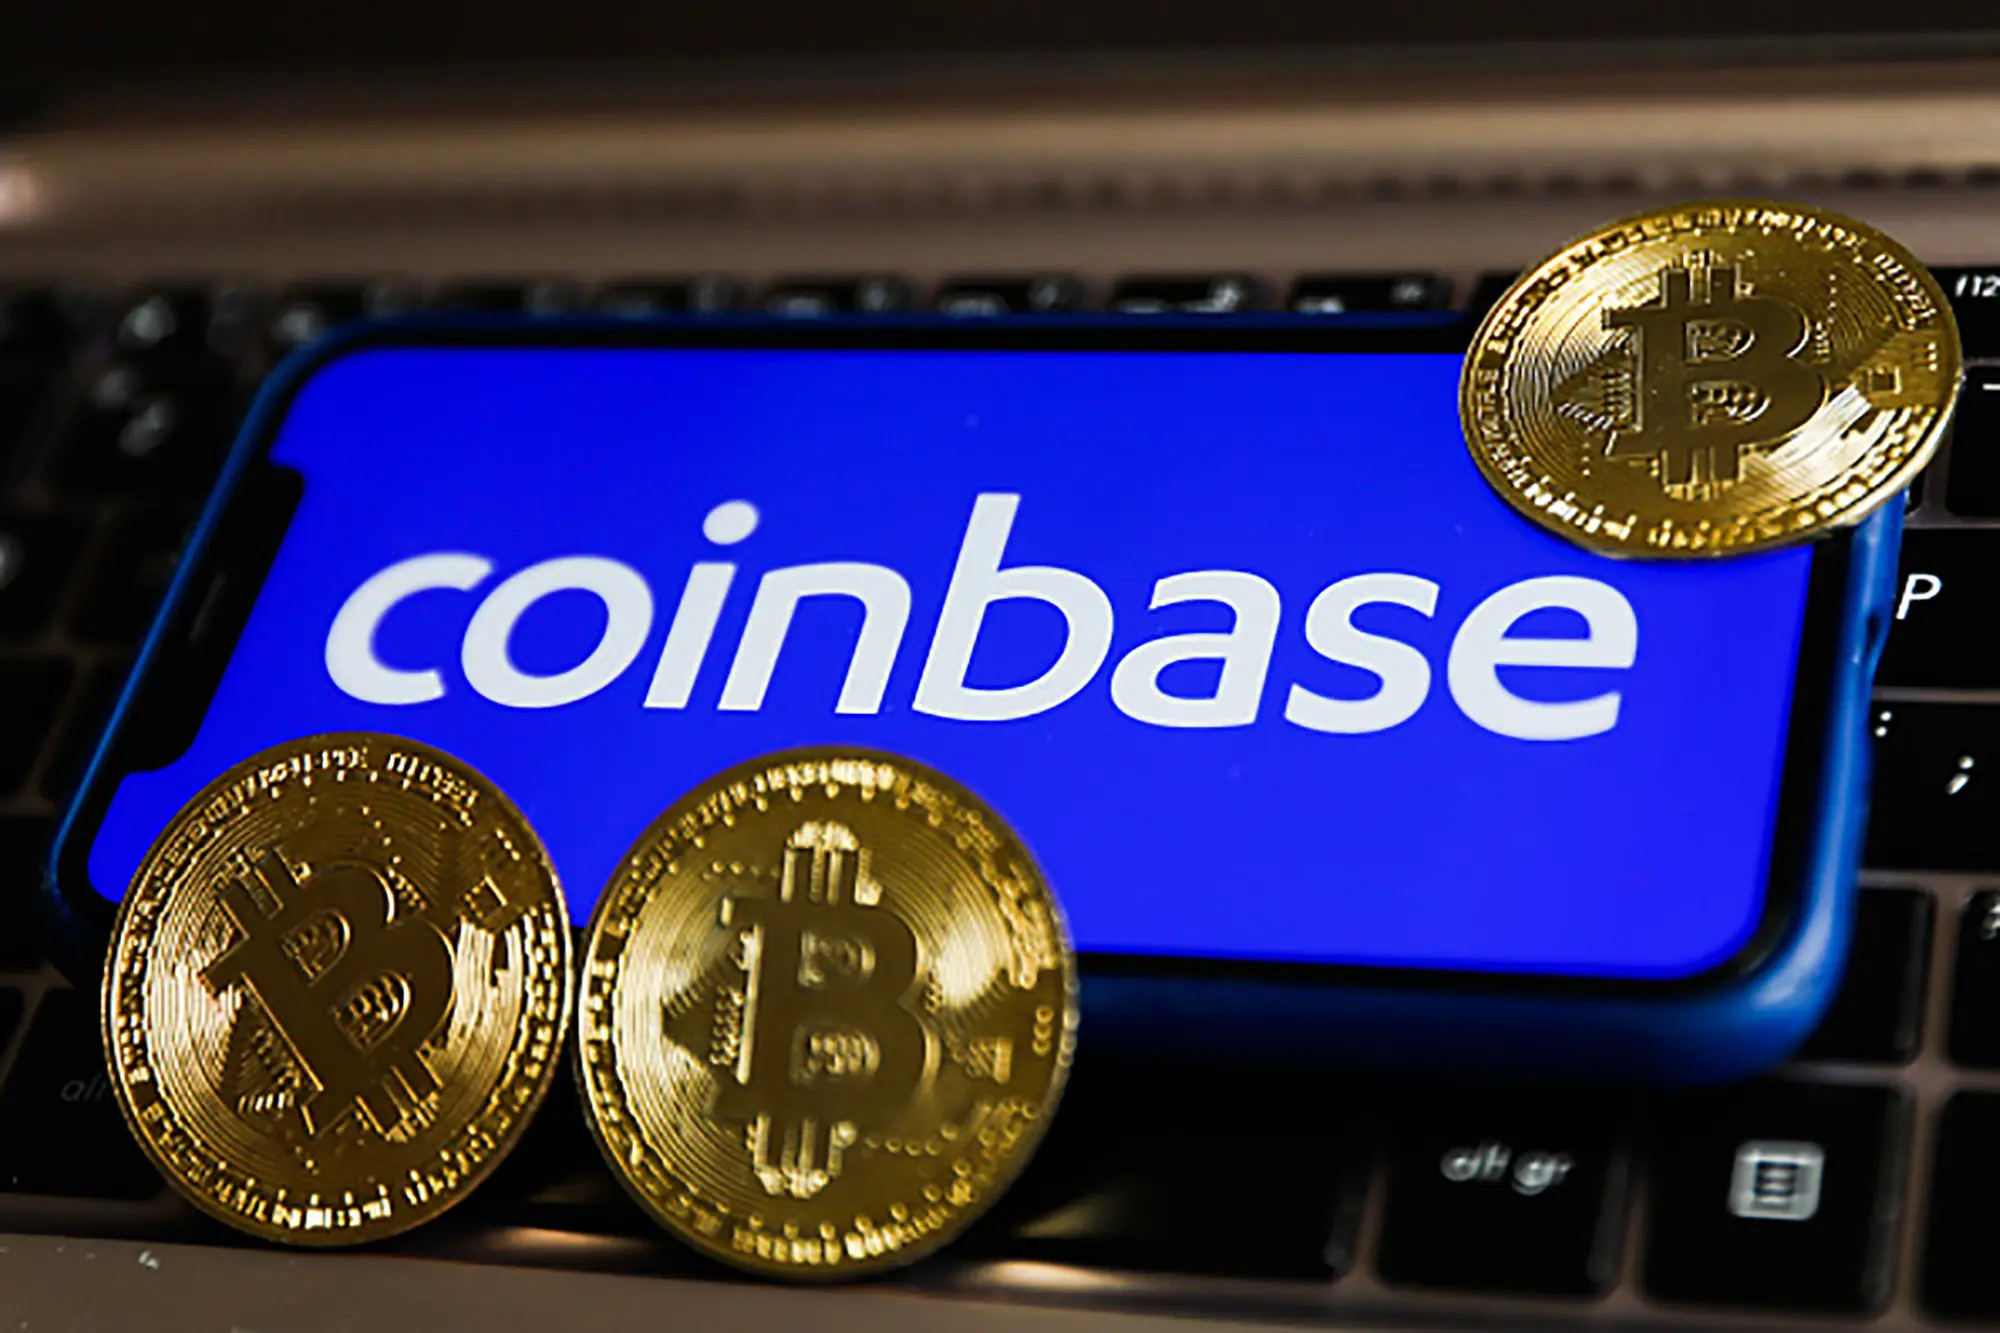 Coinbase Foresees Bitcoin Upswing: FTX Sell-Off Amid Fed’s Easing Signals